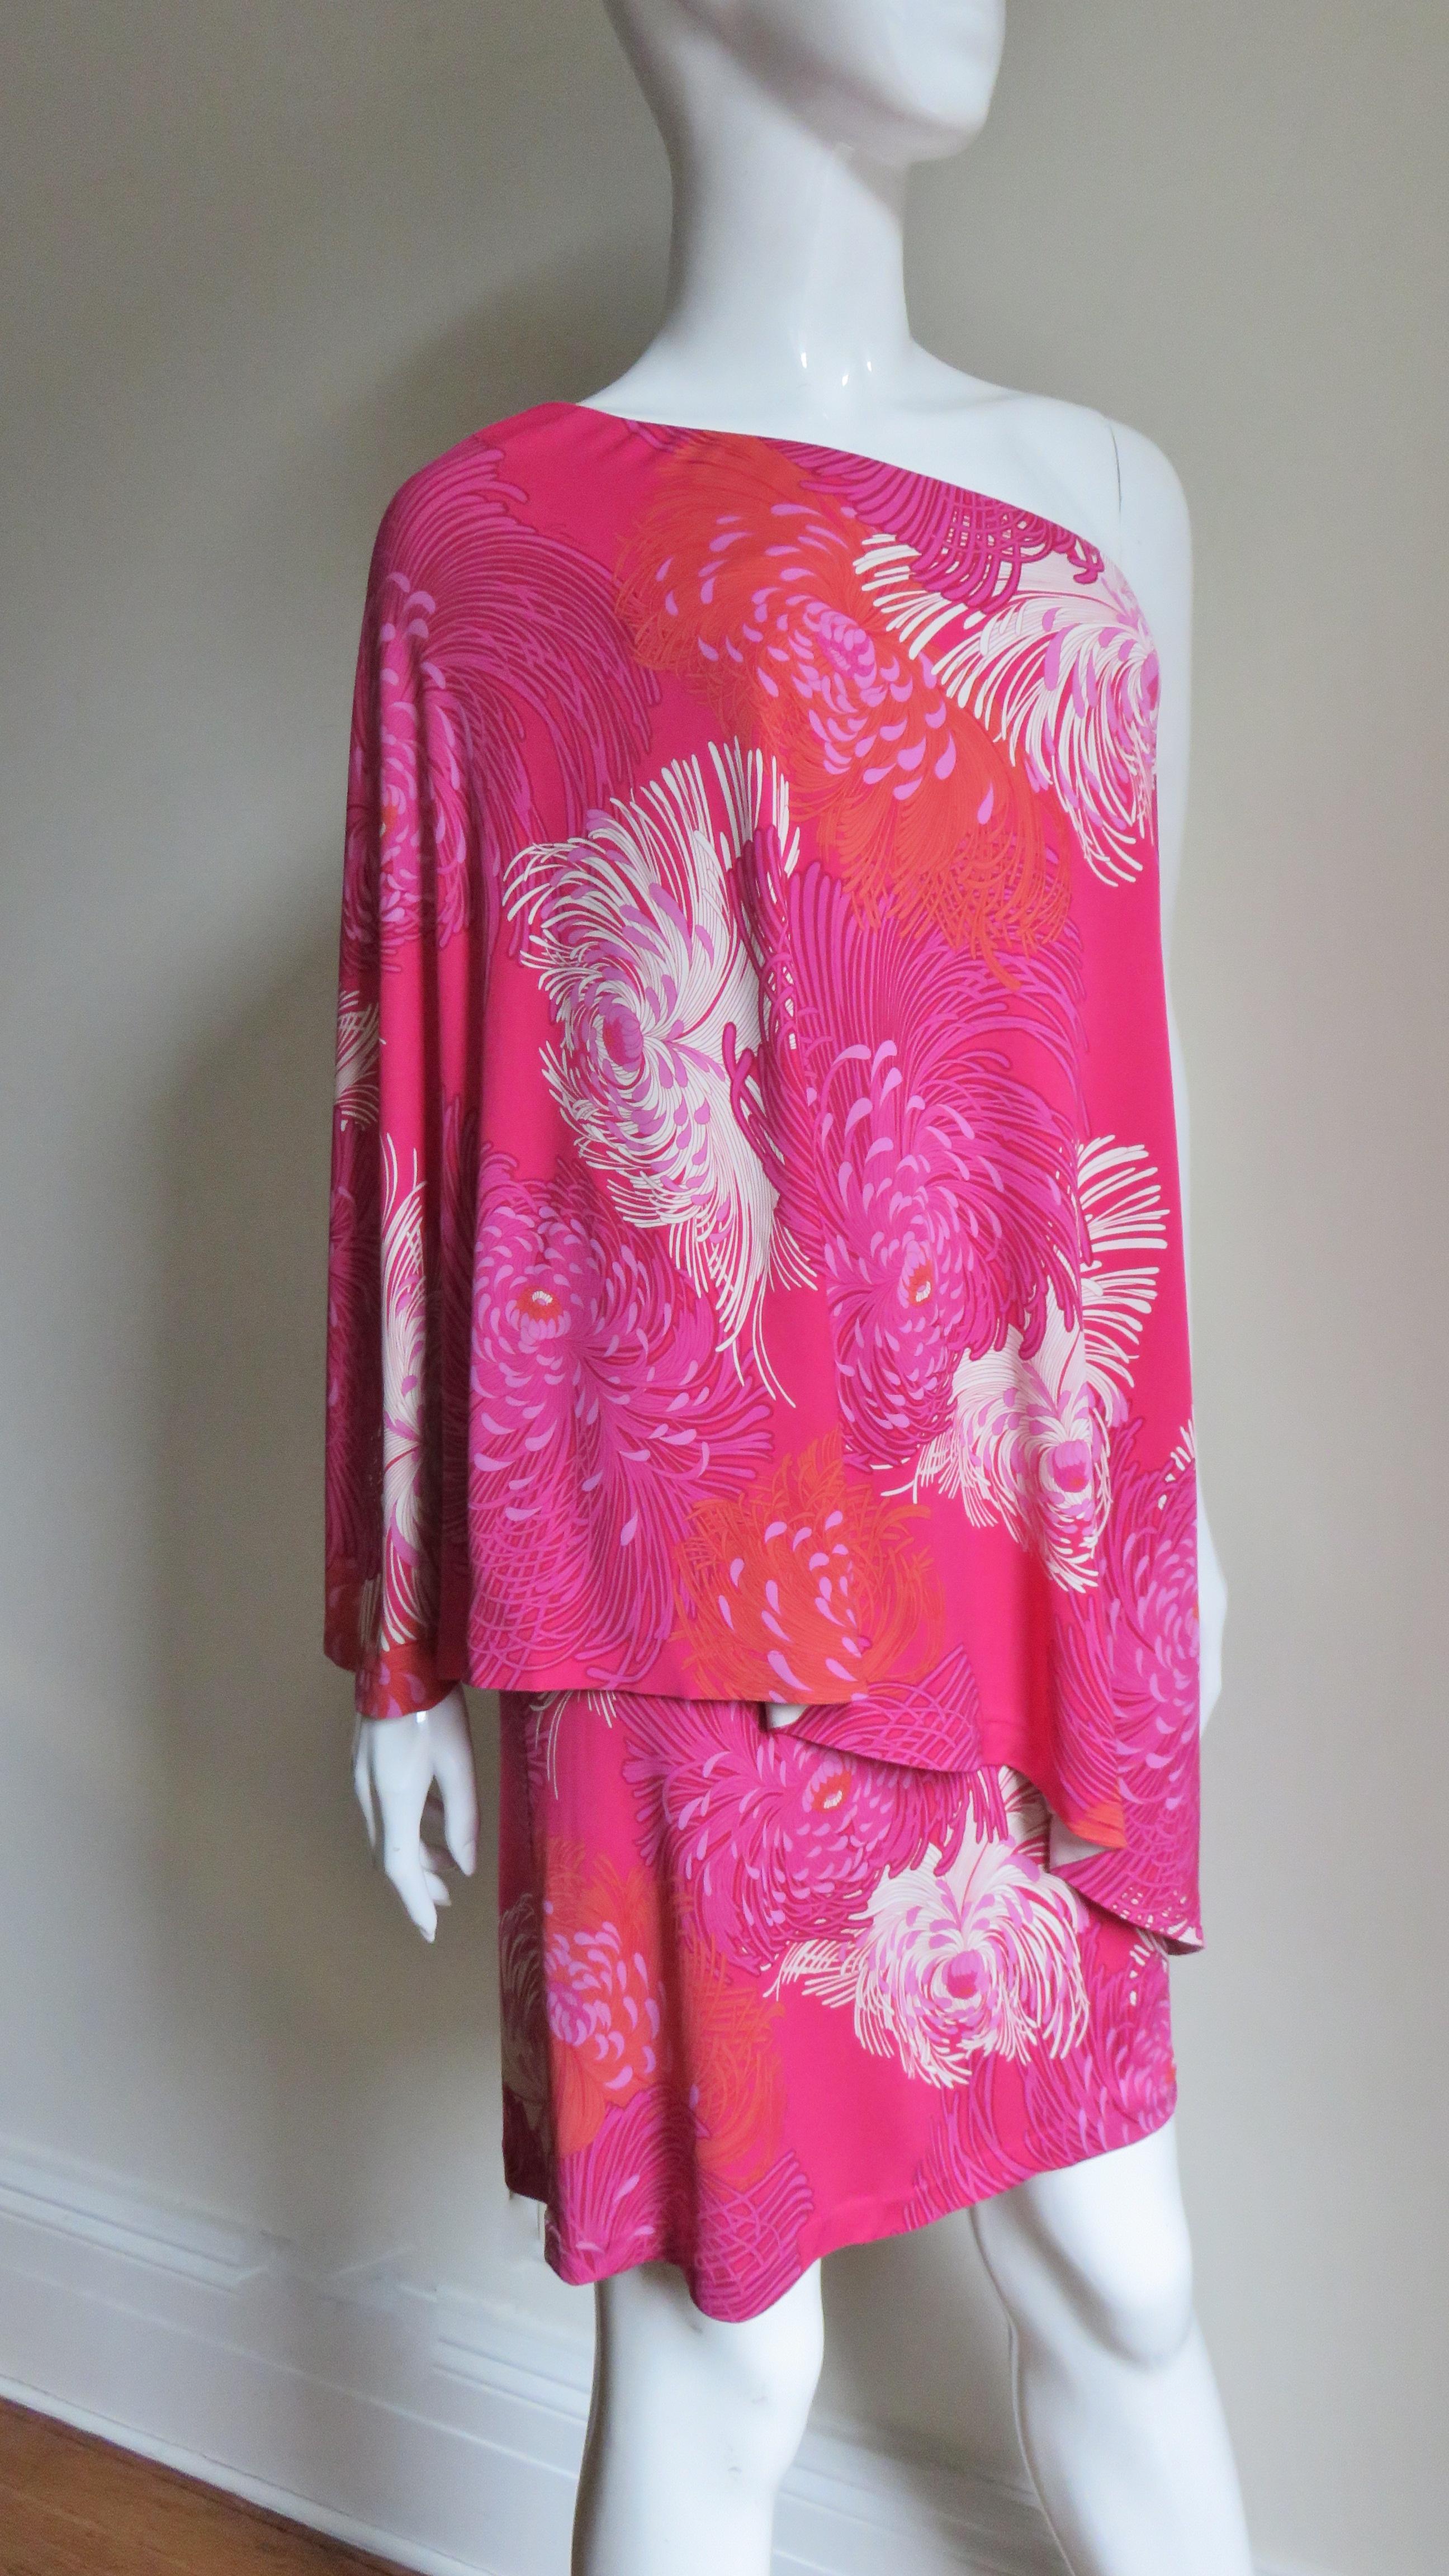  Gucci SS 2013 Silk One Shoulder Dress In Good Condition For Sale In Water Mill, NY